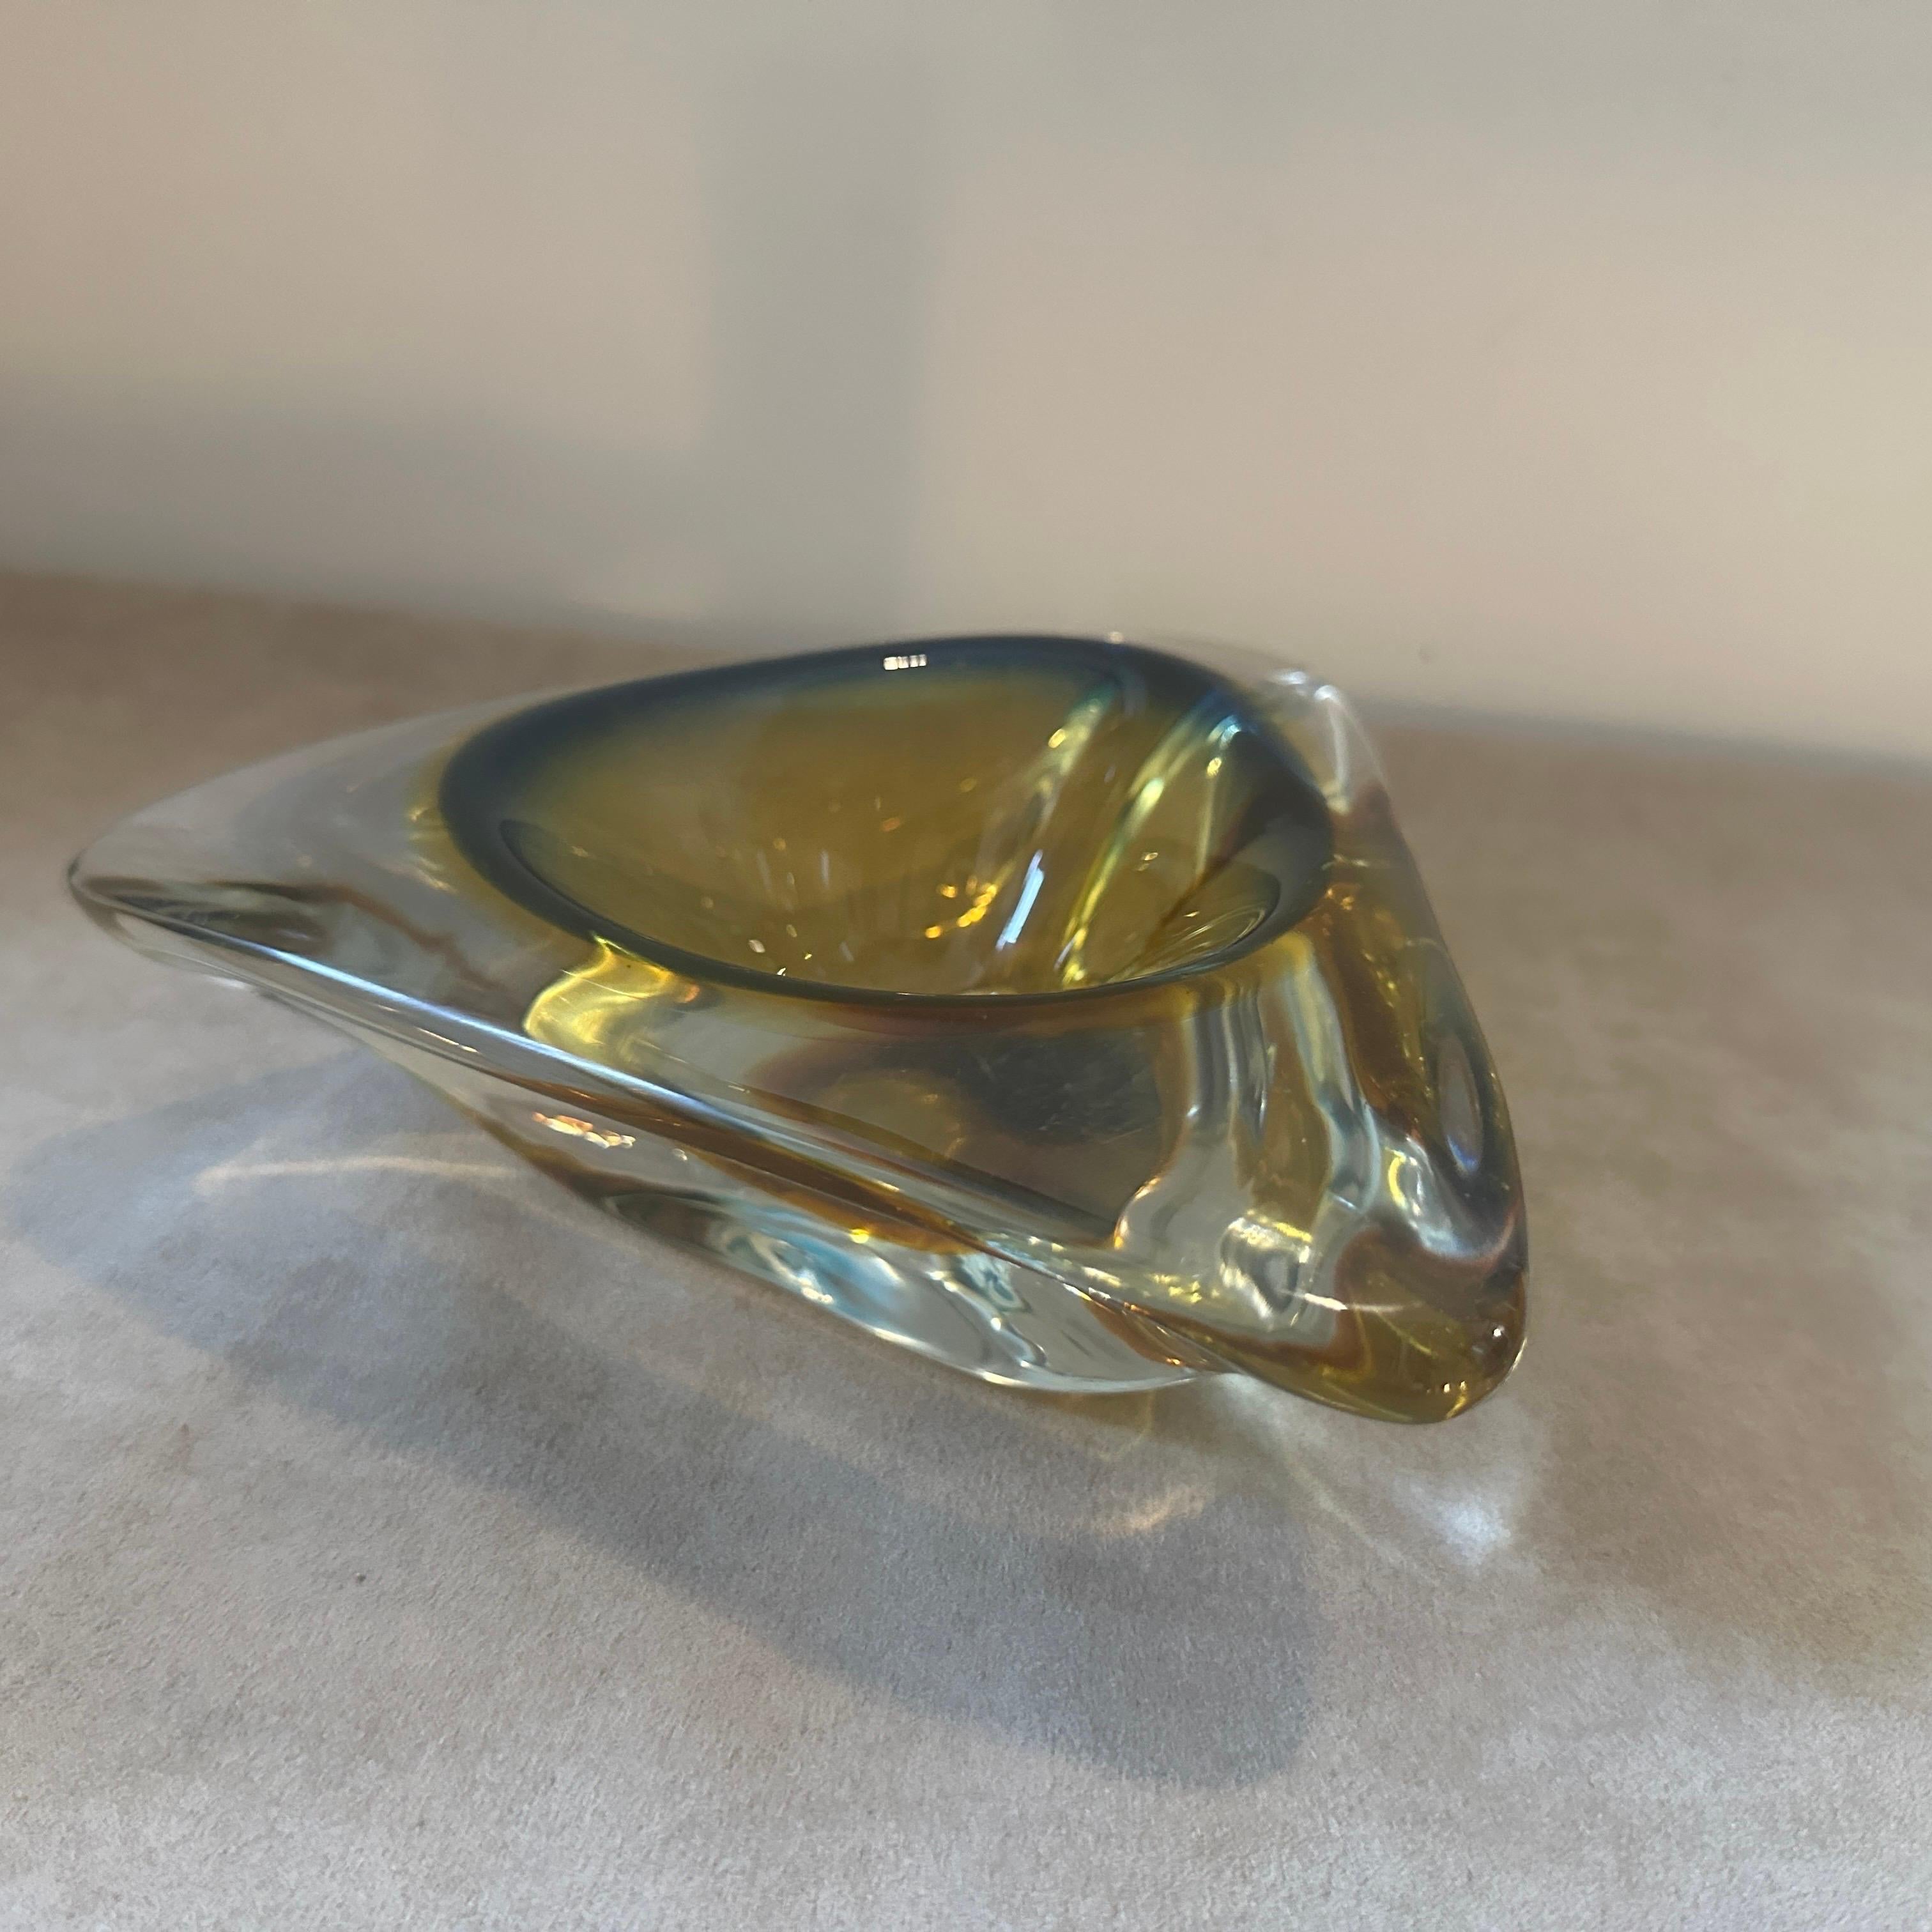 A 1960s Modernist Yellow Green Sommerso Murano Glass Ashtray by Seguso For Sale 1